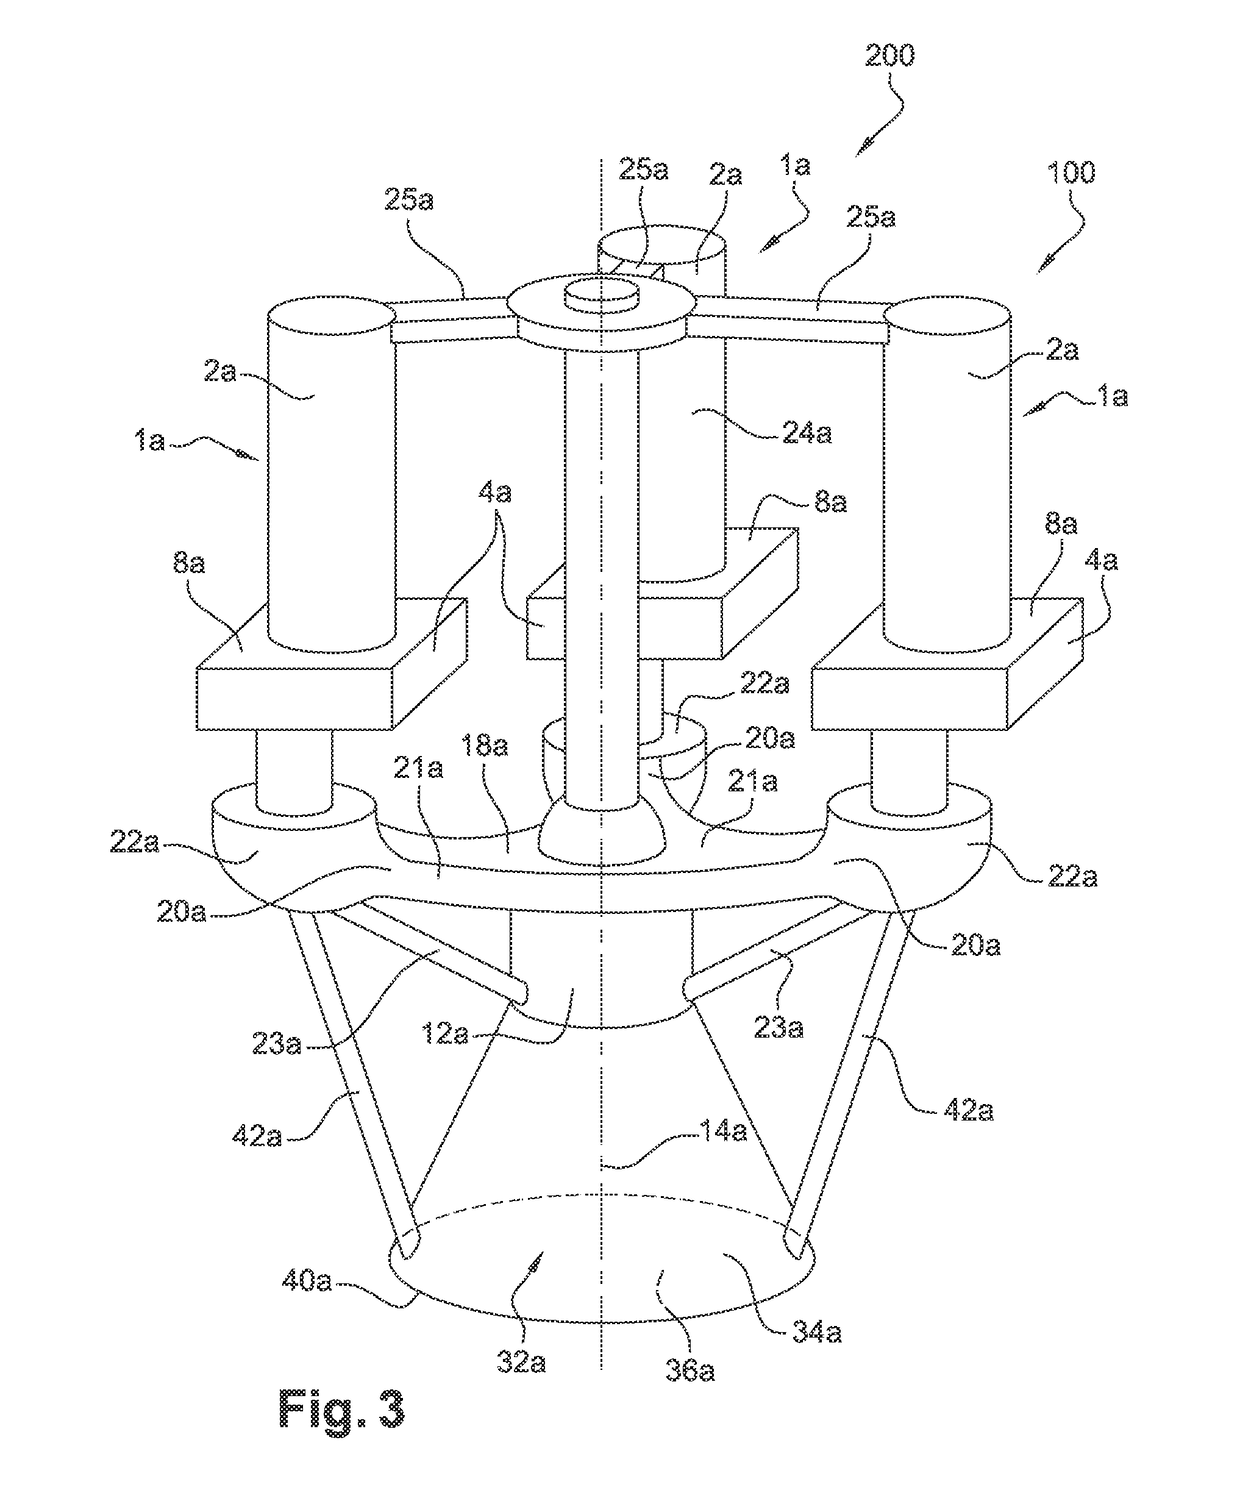 Improved method for manufacturing a shell mold for production by lost-wax casting of bladed elements of an aircraft turbine engine